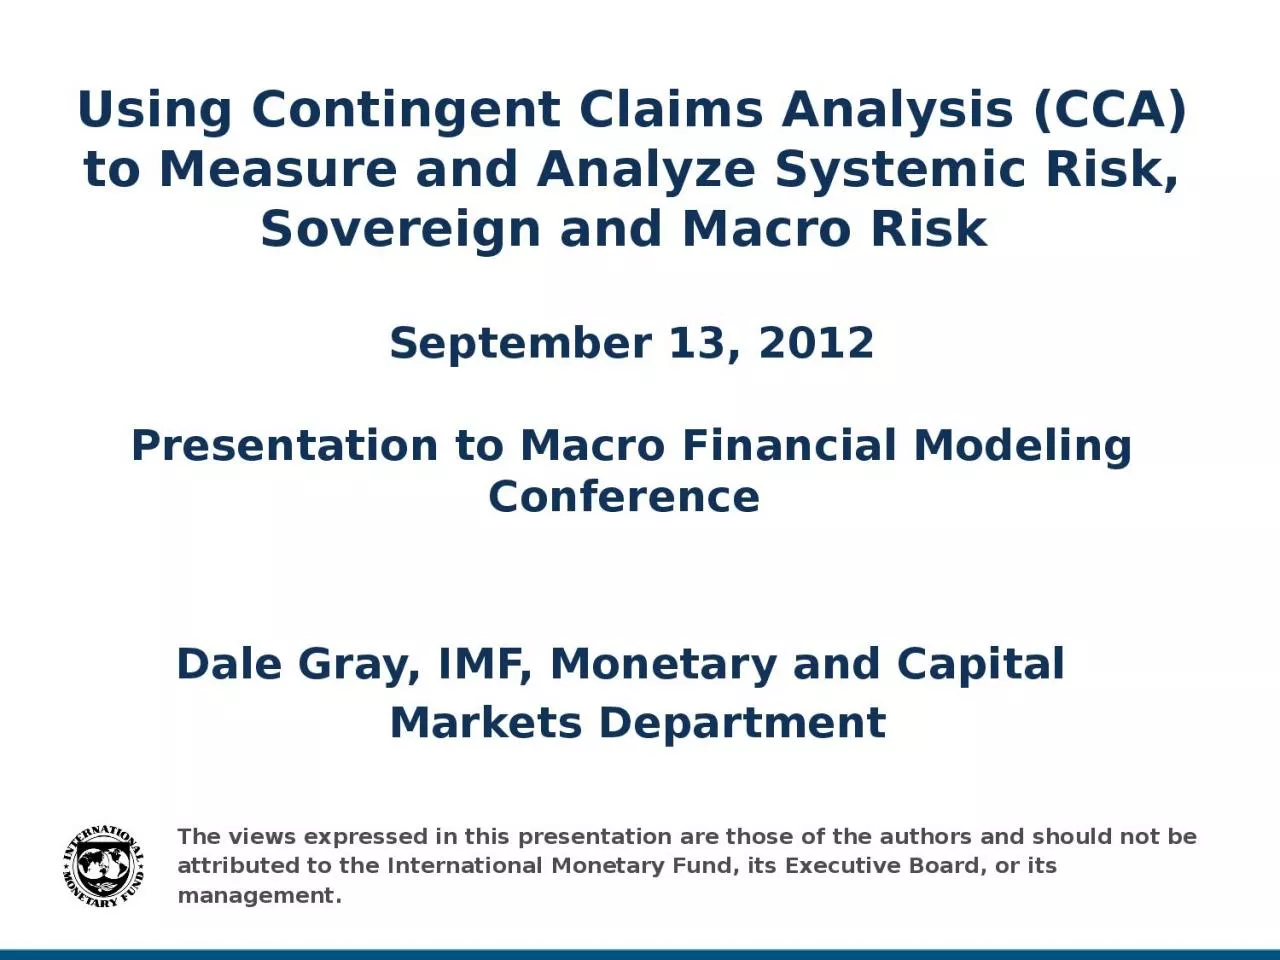 Using Contingent Claims Analysis (CCA) to Measure and Analyze Systemic Risk, Sovereign